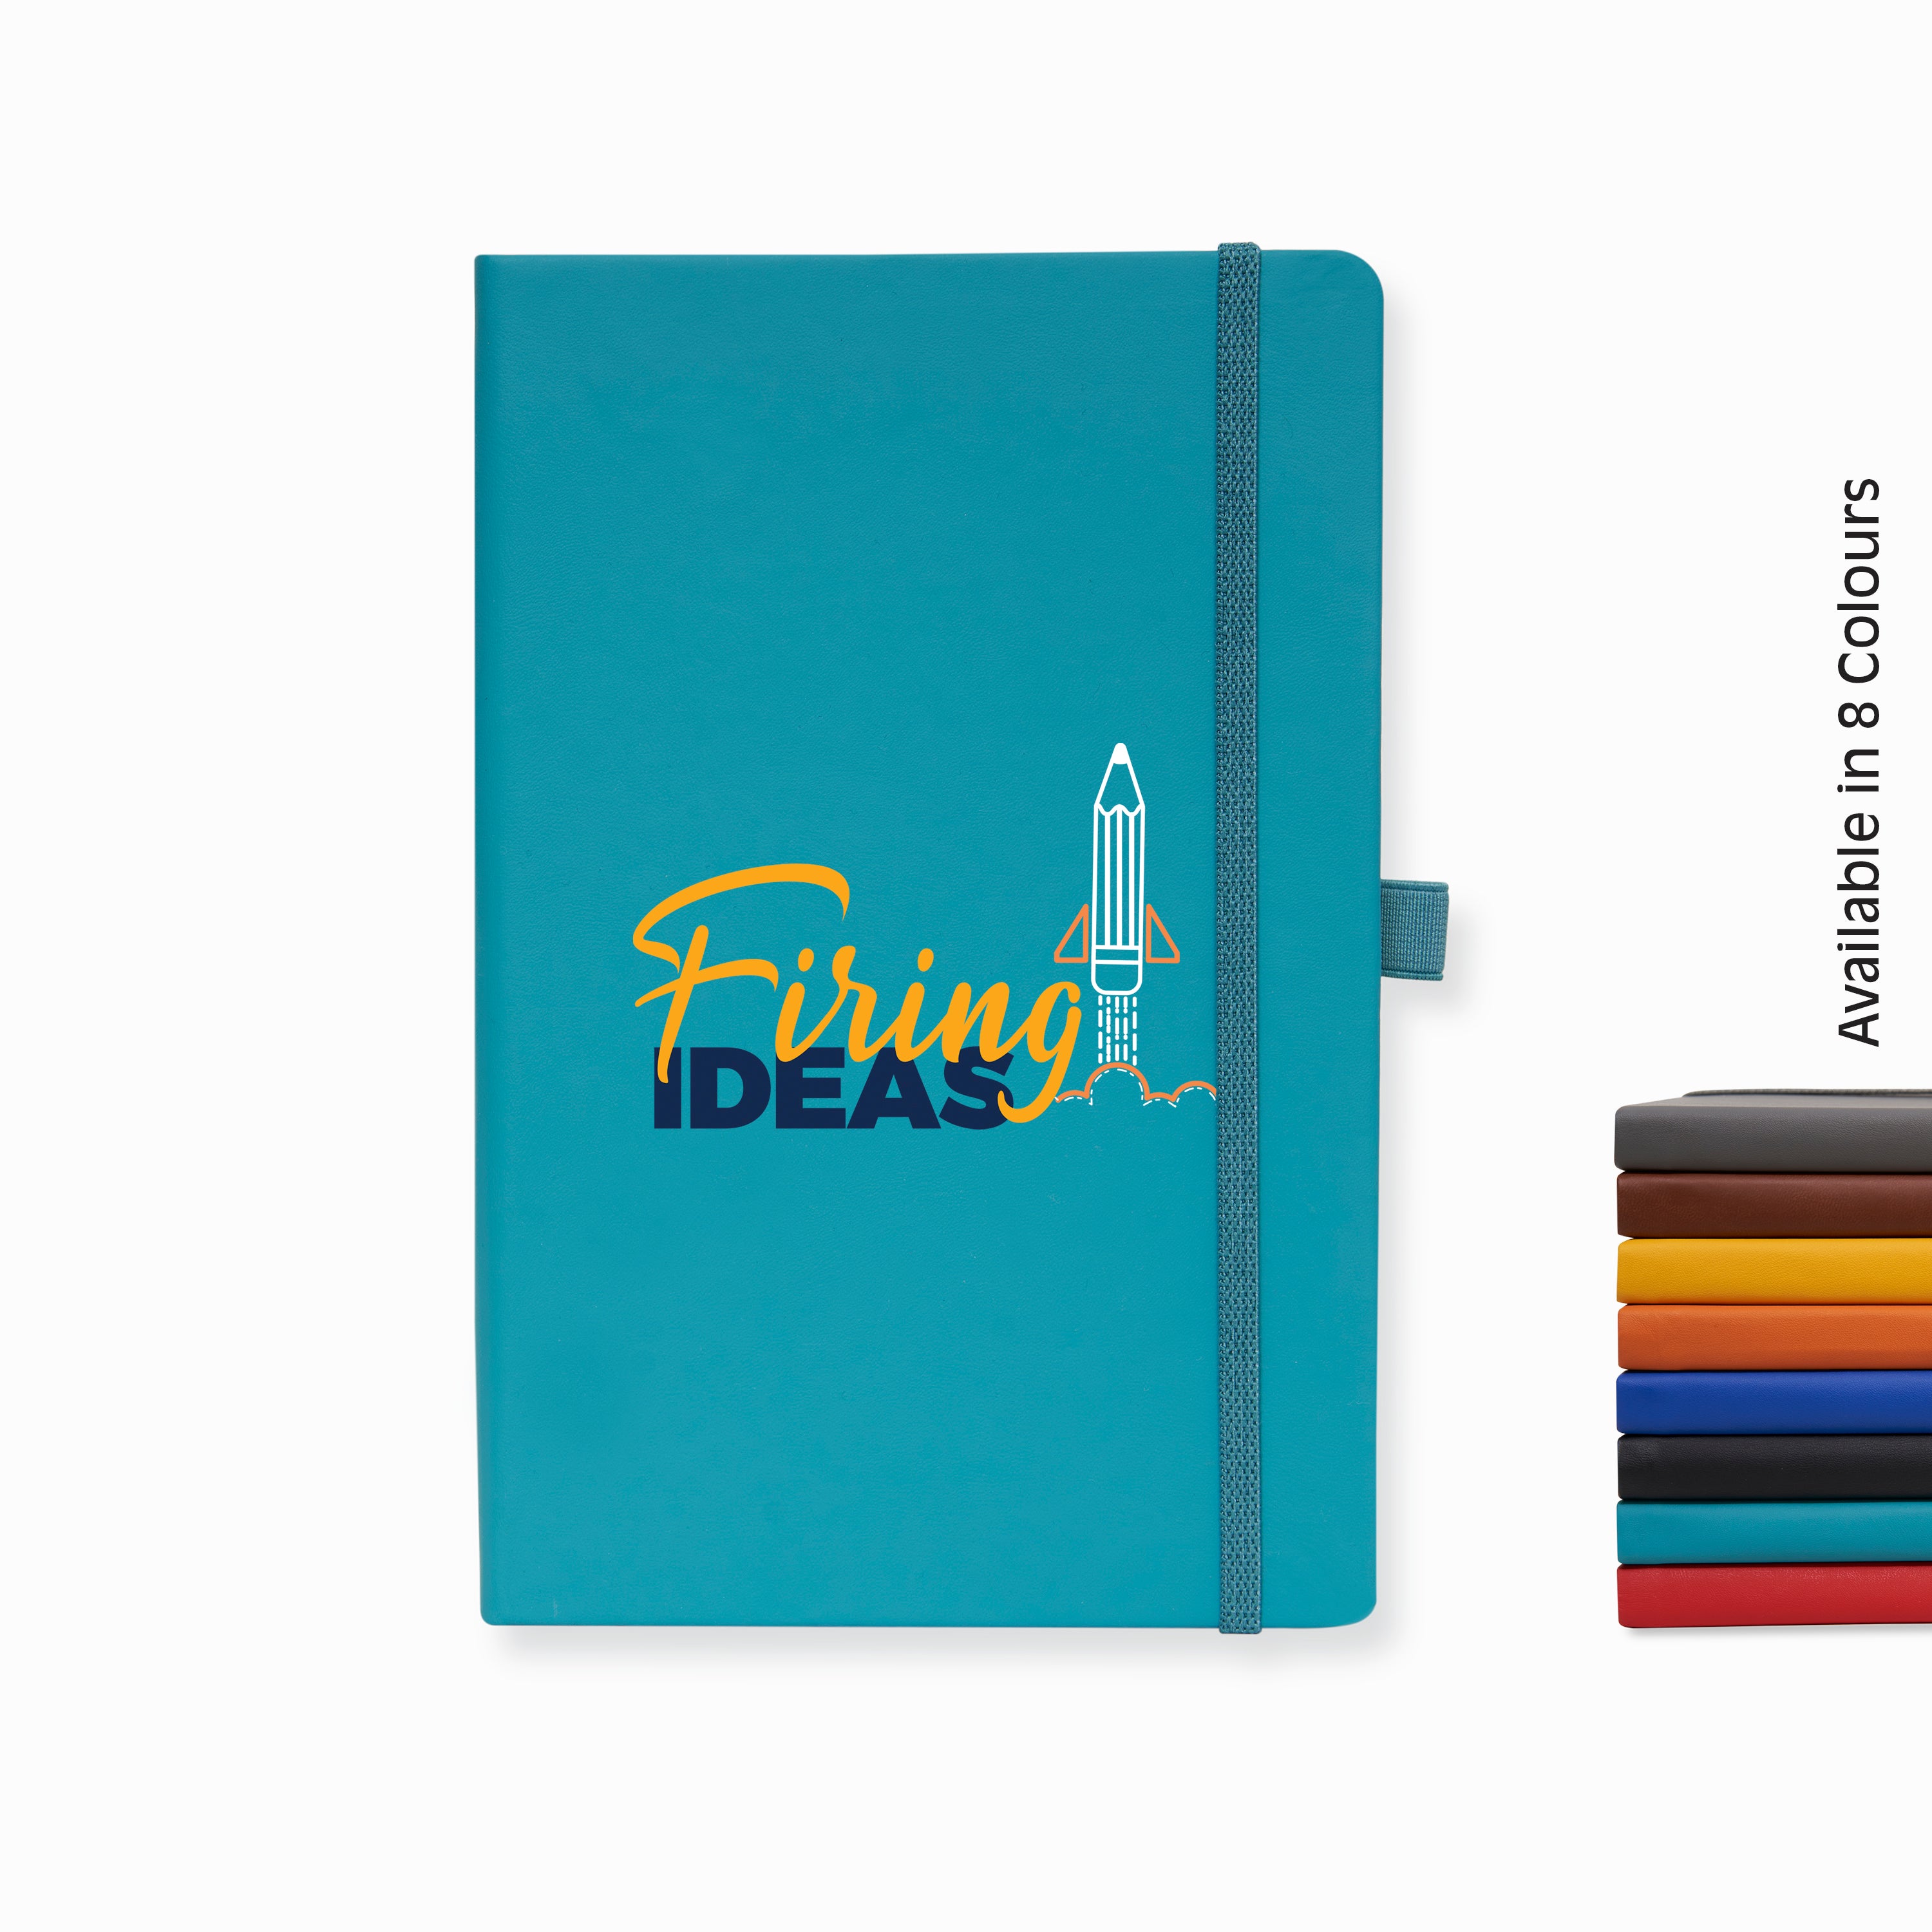 Doodle Pro Series Executive A5 PU Leather Hardbound Ruled Turkish Blue Notebook with Pen Loop [Firing Ideas]